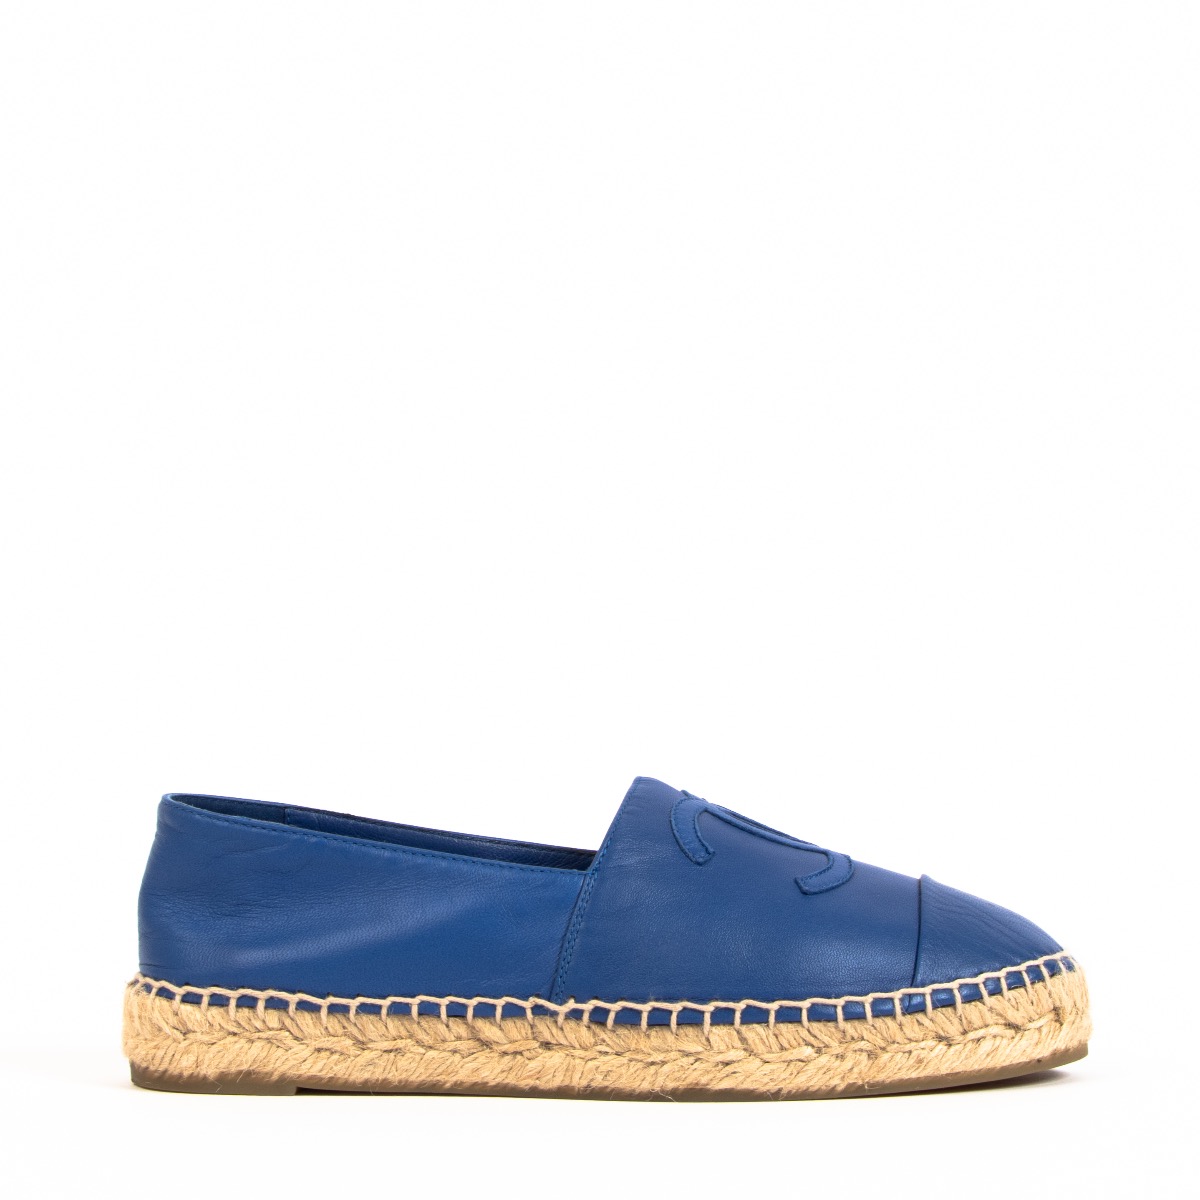 Leather flip flops Chanel Blue size 37 EU in Leather - 11743423